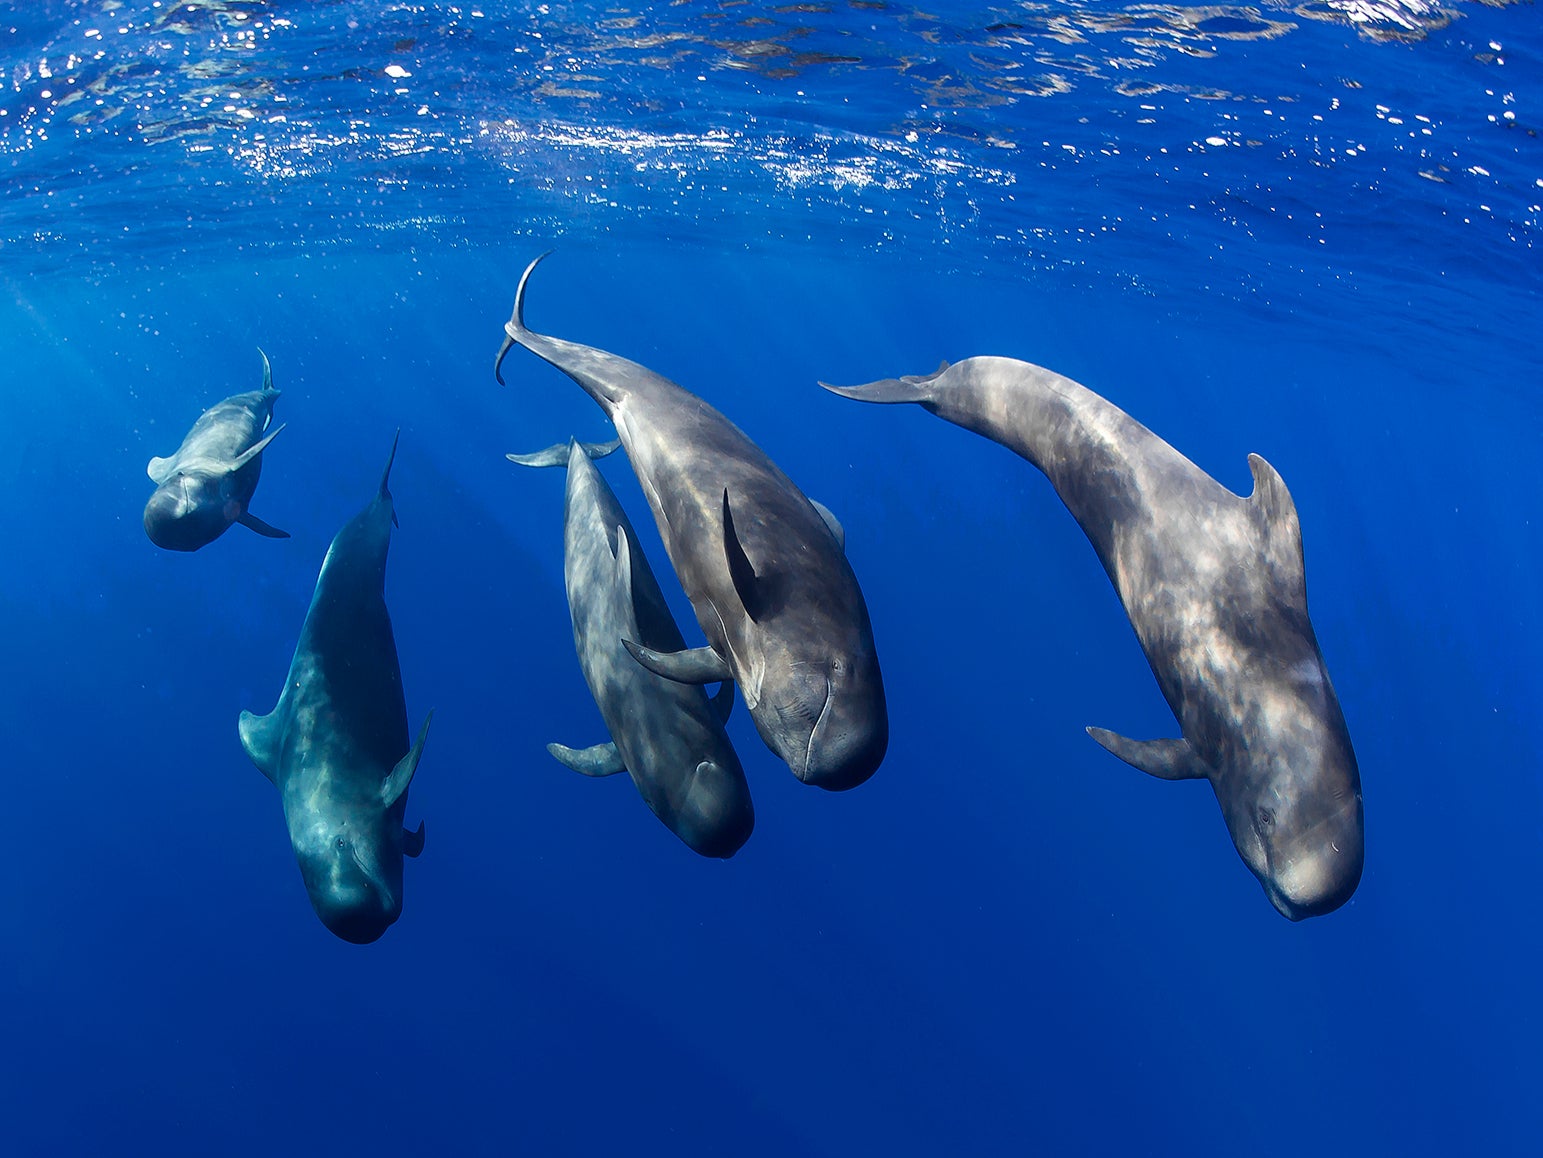 Tenerife is home to the short-finned pilot whale